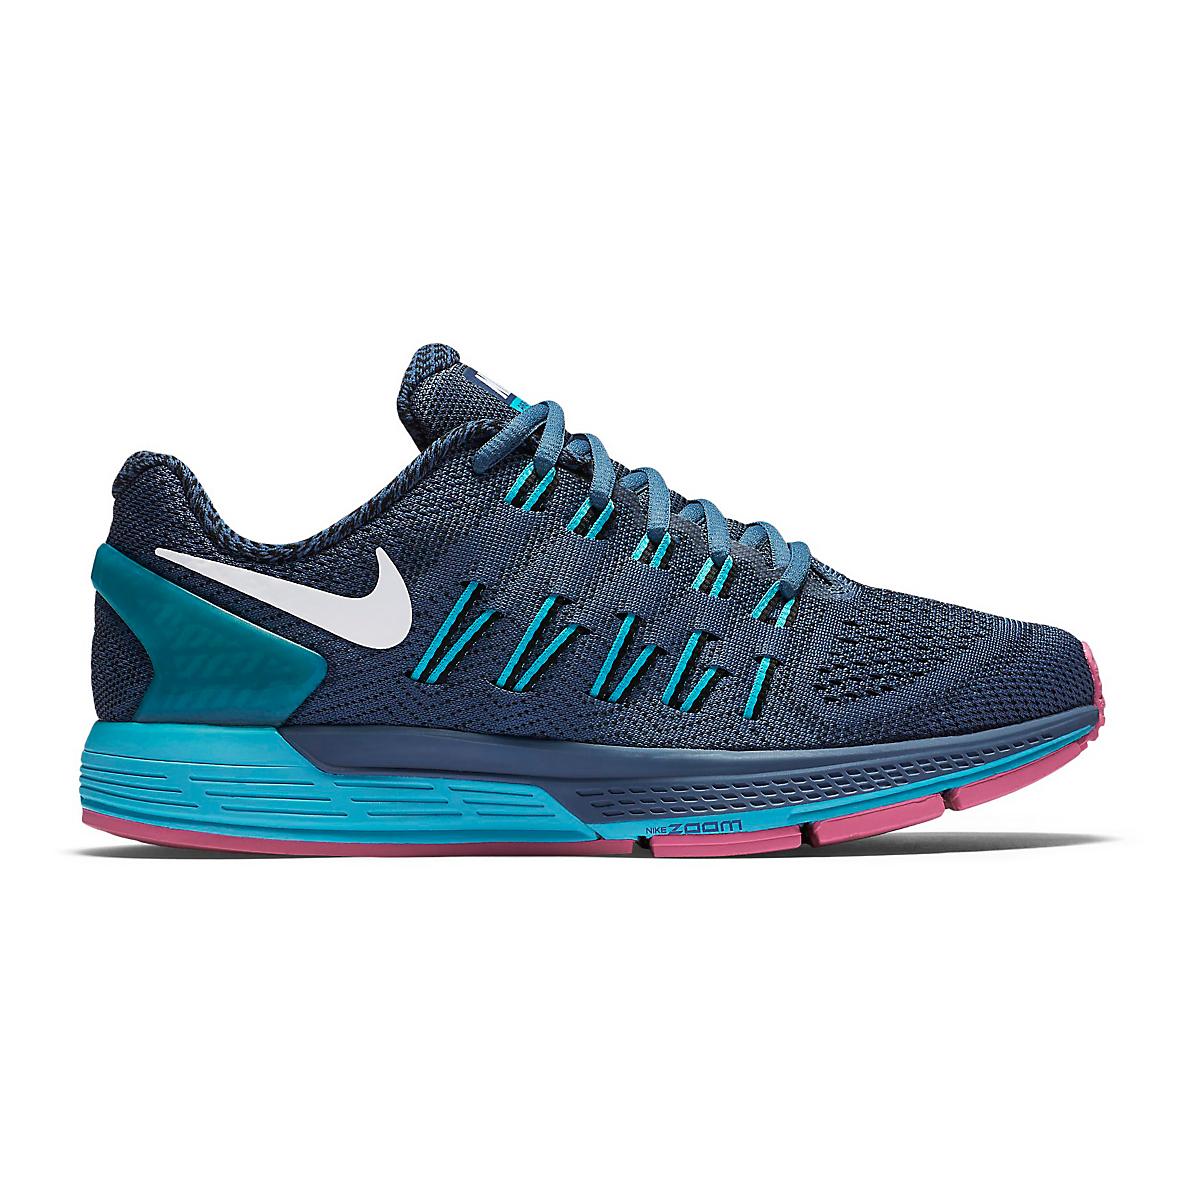 Womens Nike Air Zoom Structure 18 Running Shoe at Road Runner Sports